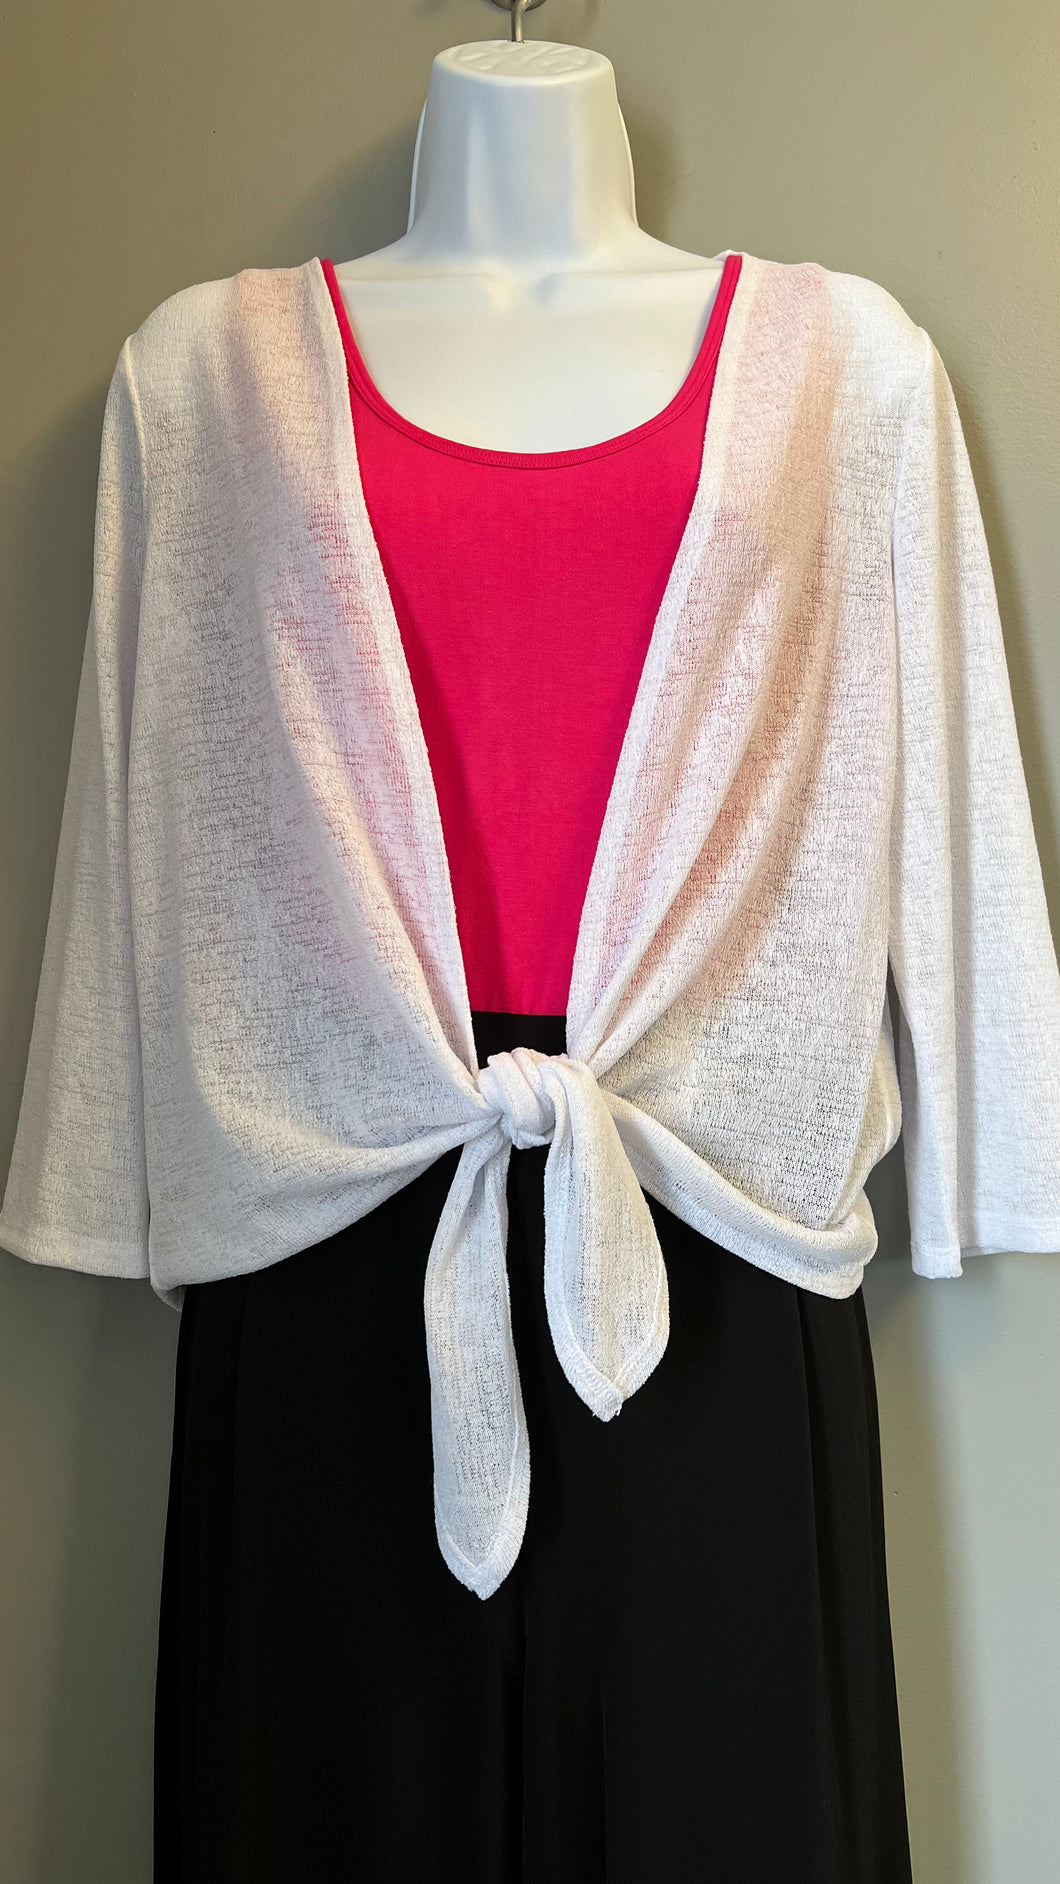 Soft Works Knit 3/4 Sleeve Tie Shrug available in Fuchsia, White or Black